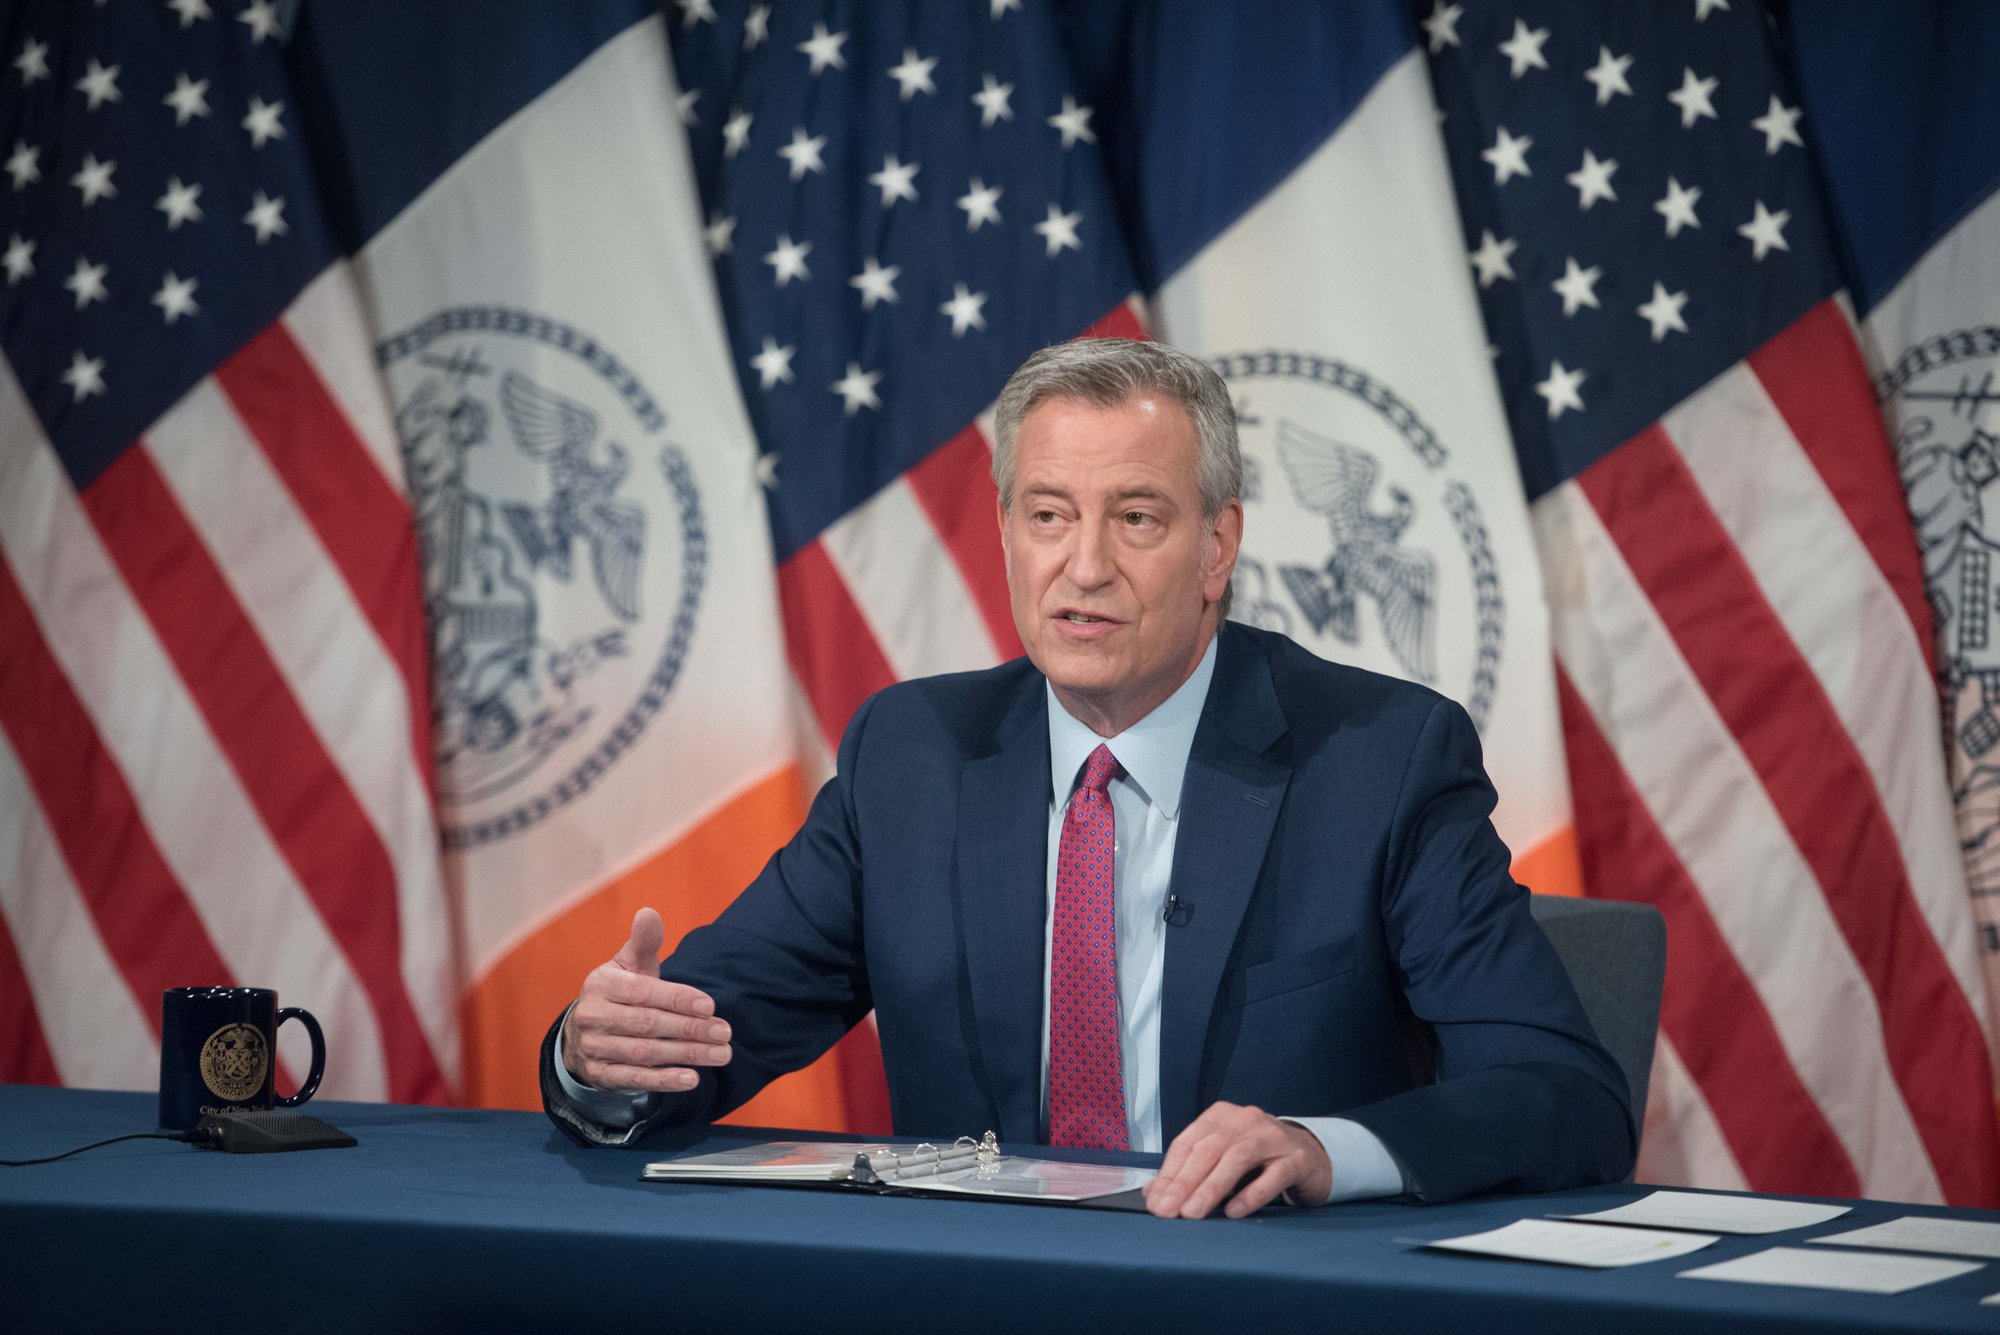 De Blasio calls for line of duty death benefits for city employees who died of COVID-19